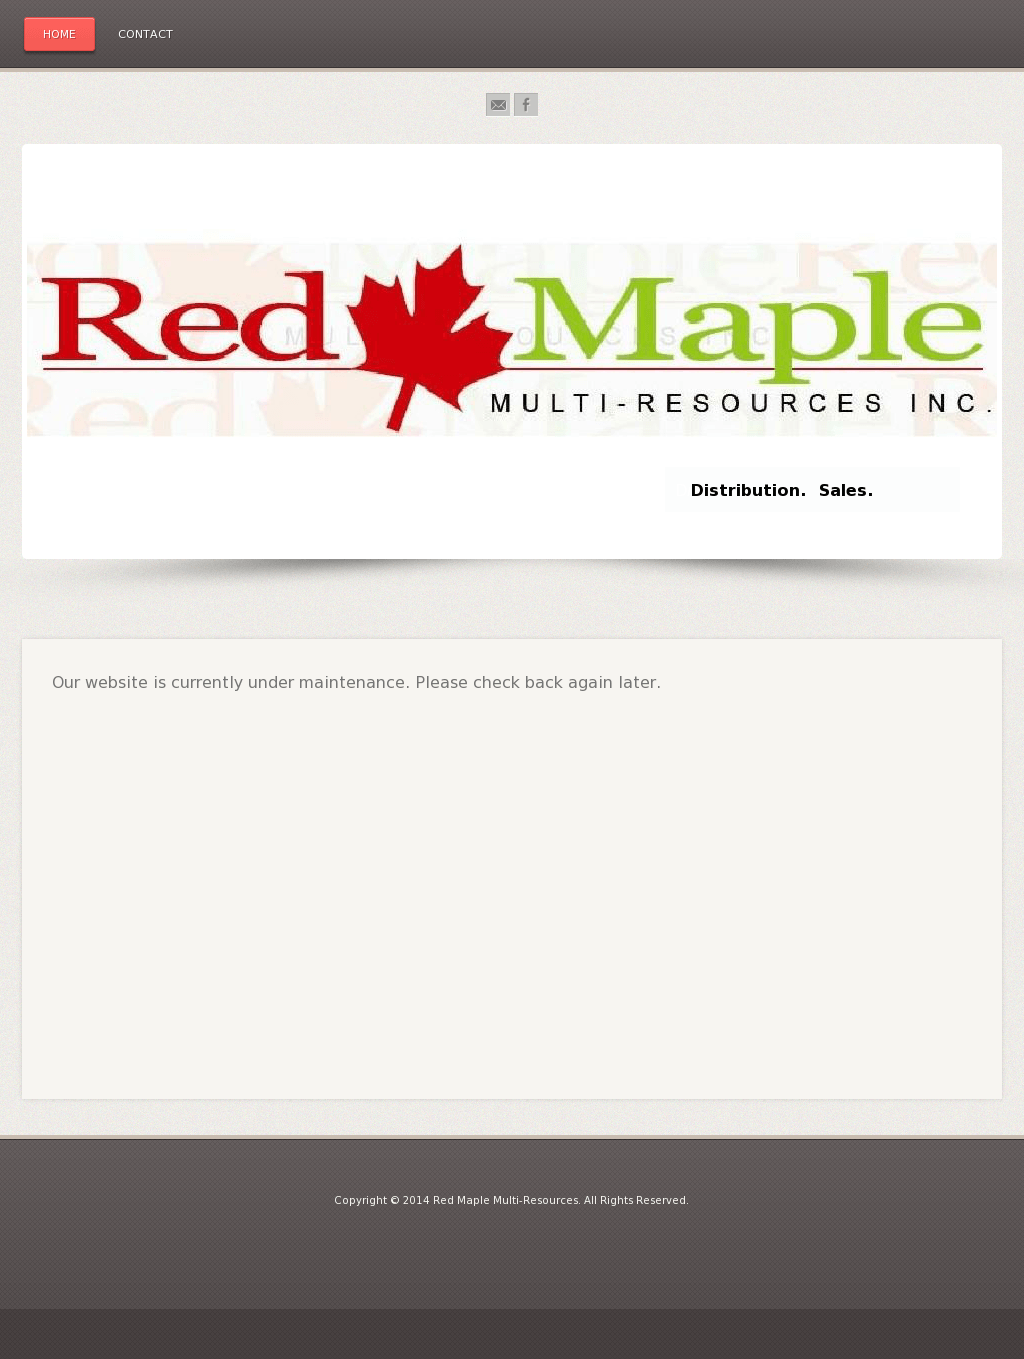 Red Maple Logo - Red Maple Multi Resources Competitors, Revenue And Employees